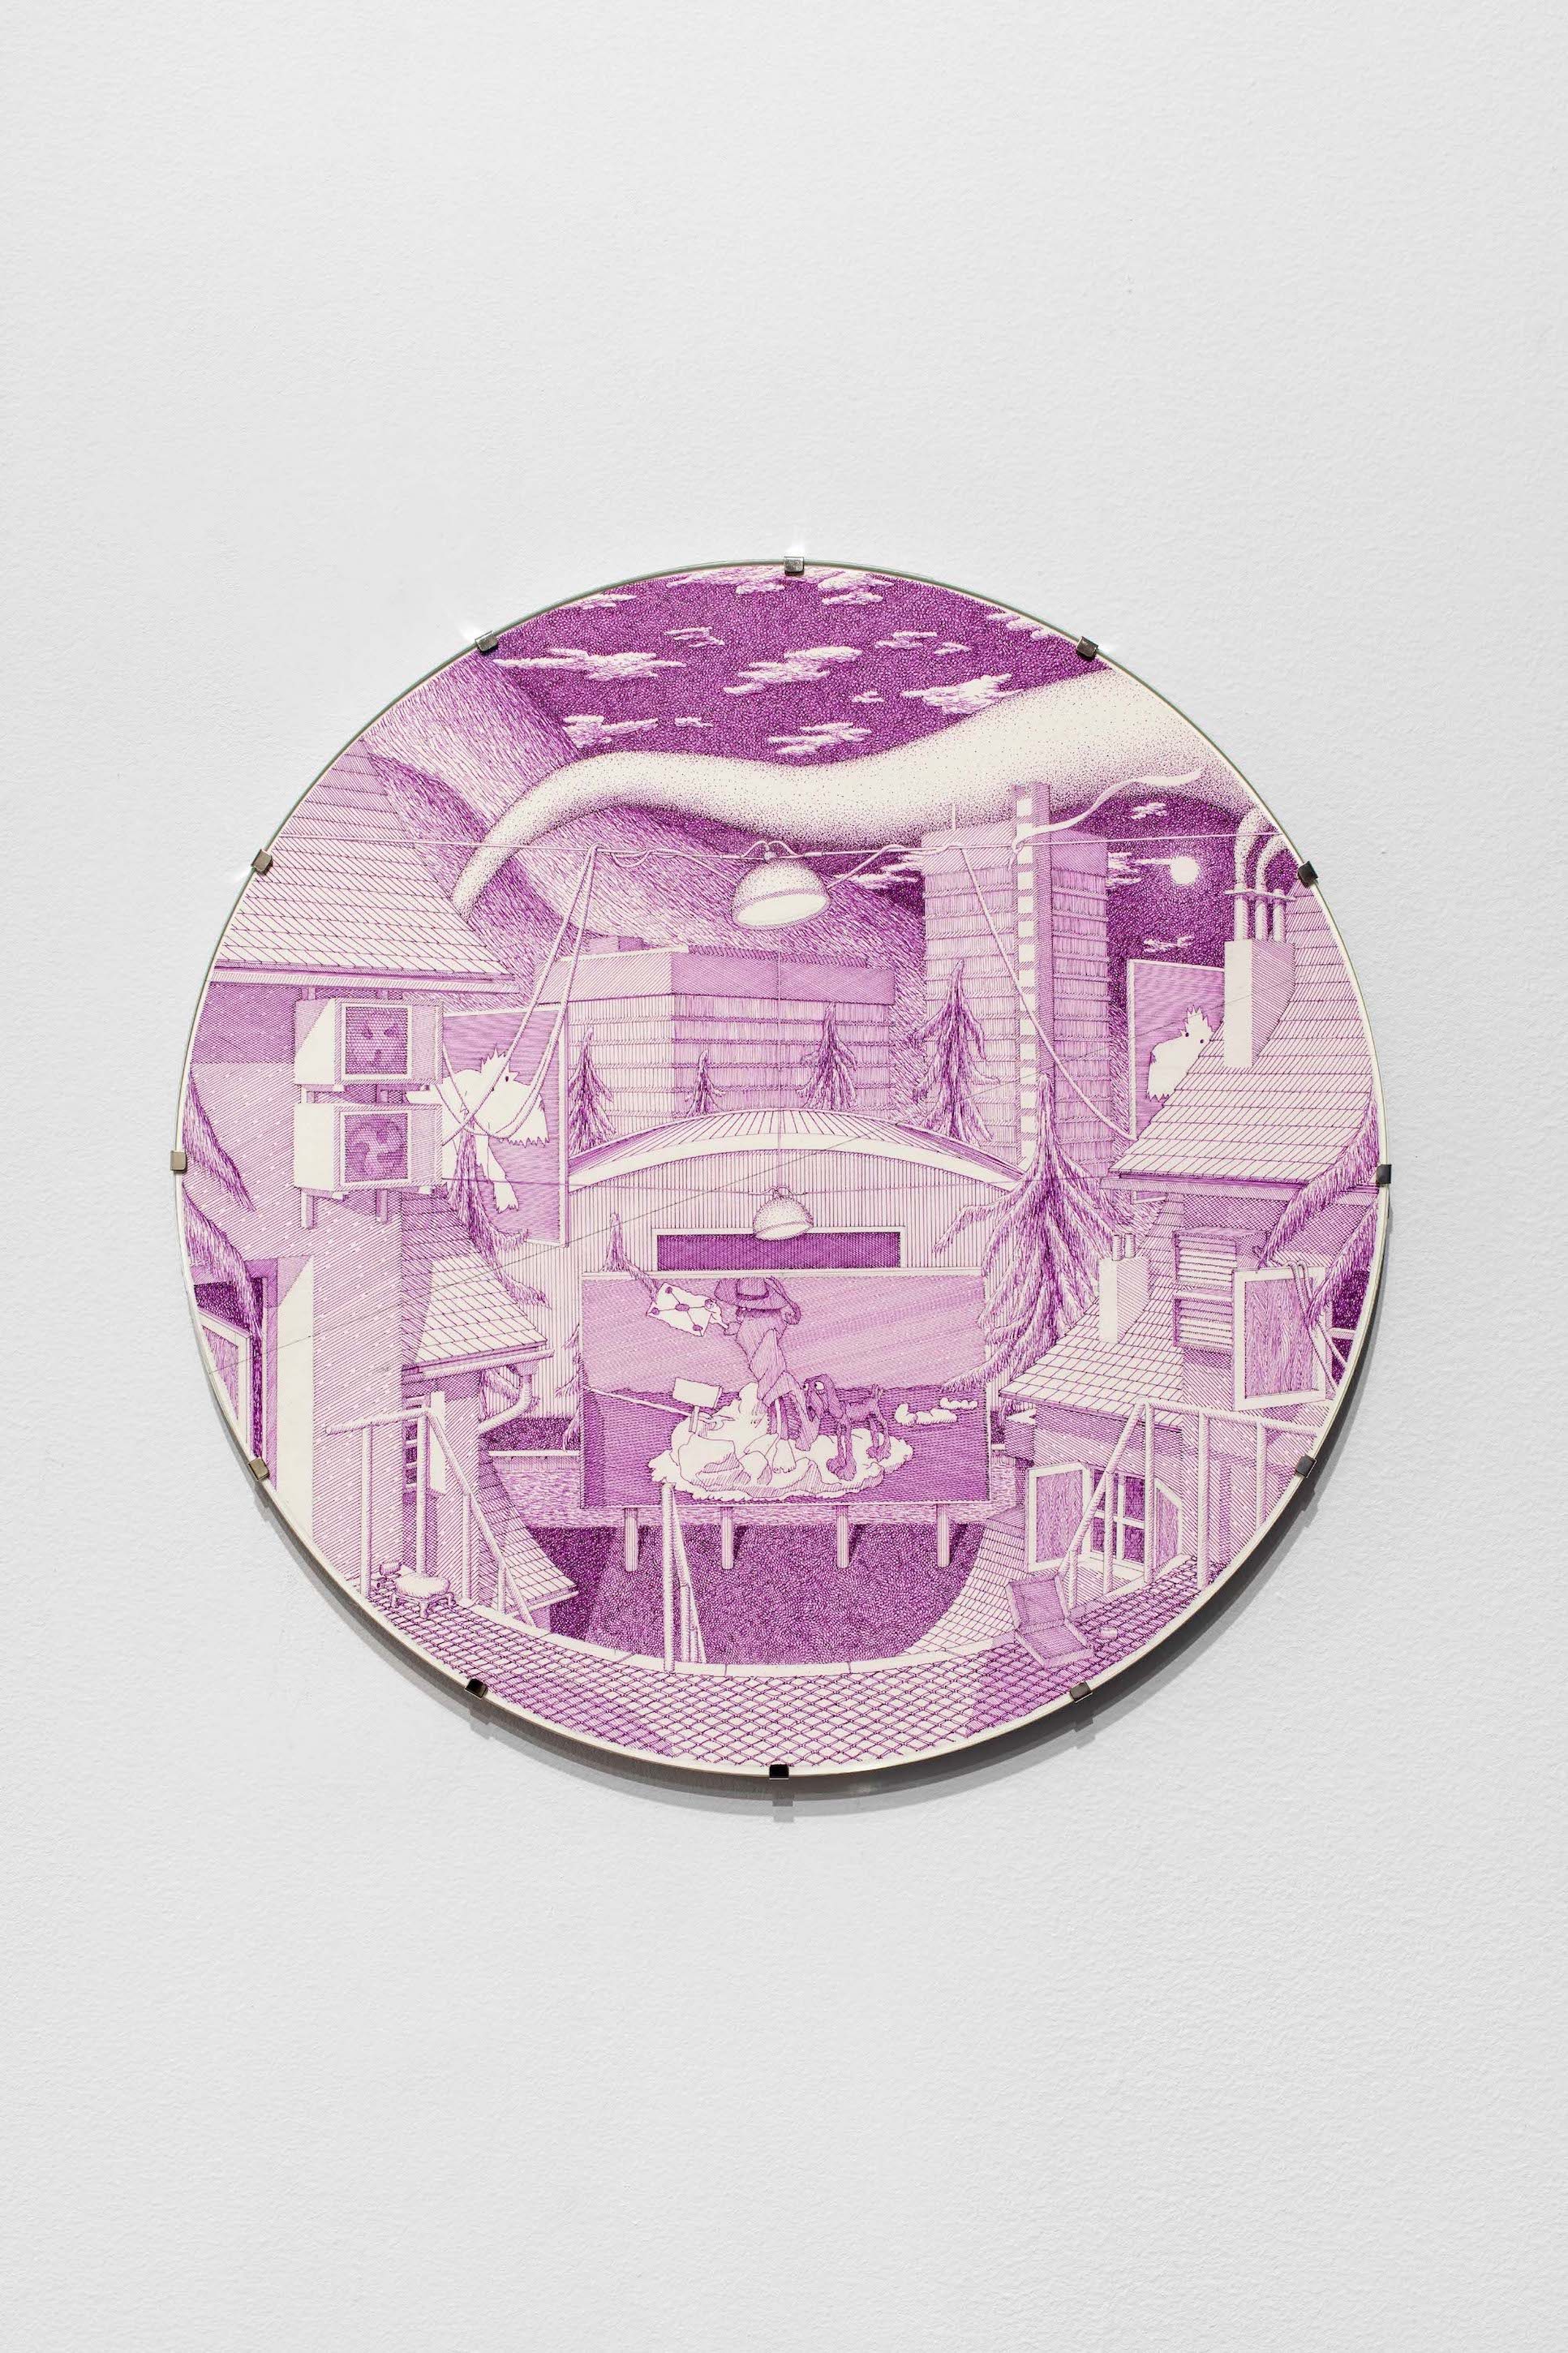 Afternoon 7 (Mysterious Pete & his hound), 2023 Ink on paper in aluminum uv glass clipframe, 30 cm (diameter) Courtesy of the artist and CrÃ¨vecÅ“ur, Paris. Photo: Martin Argyroglo